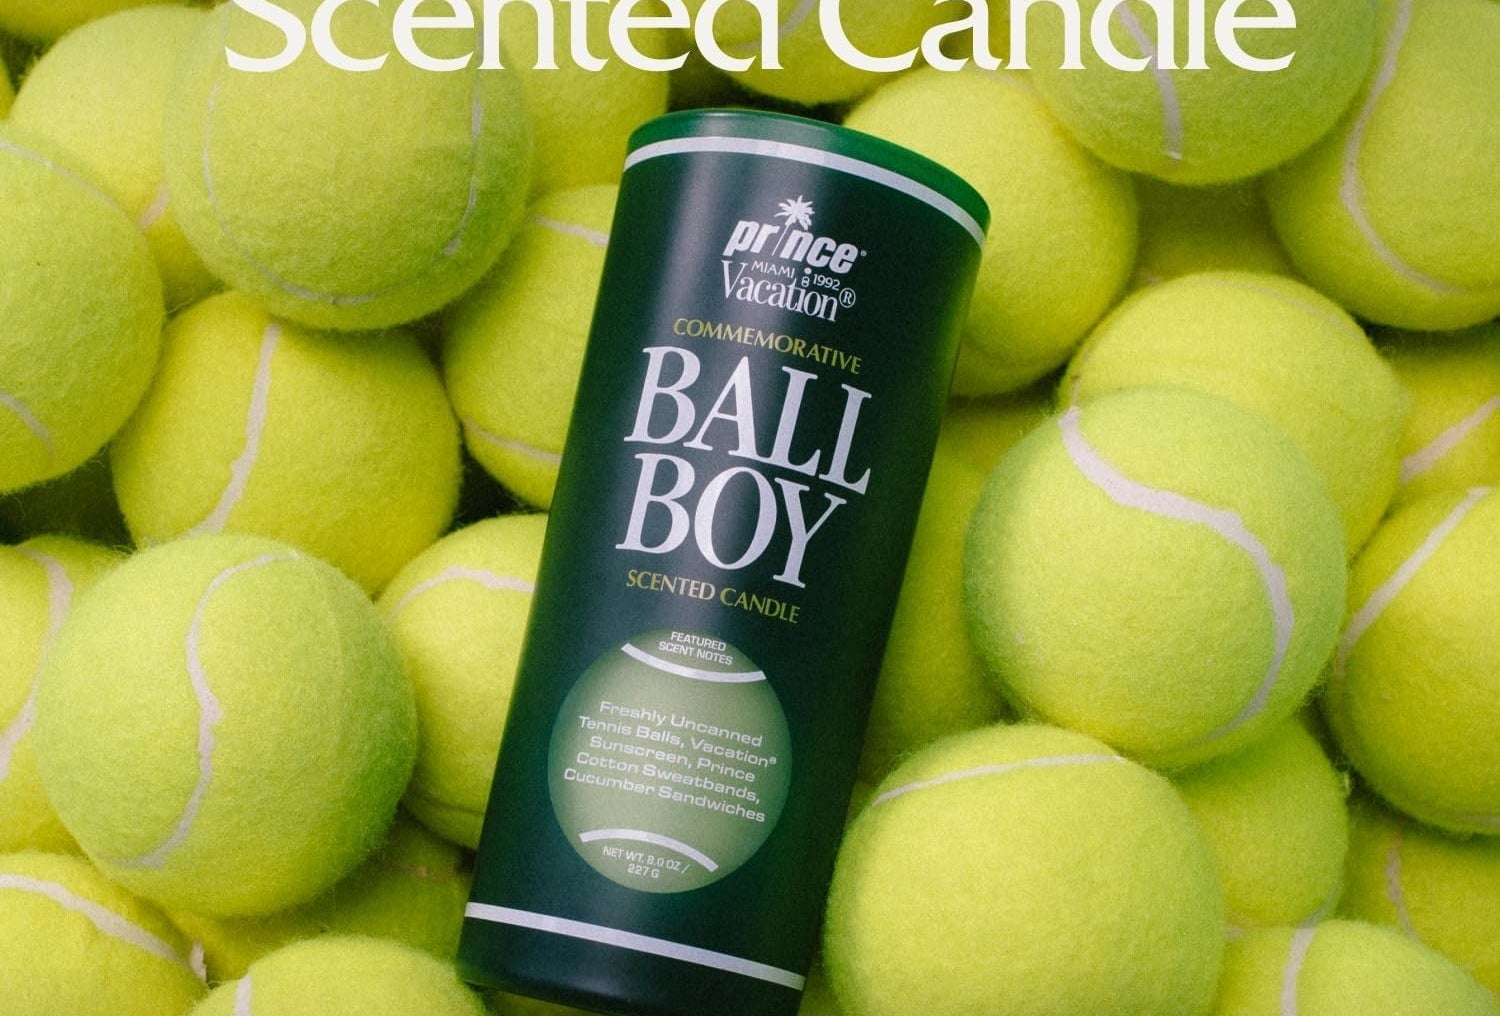 Commemorative Ball Boy scented candle by Prince Vacation, surrounded by tennis balls